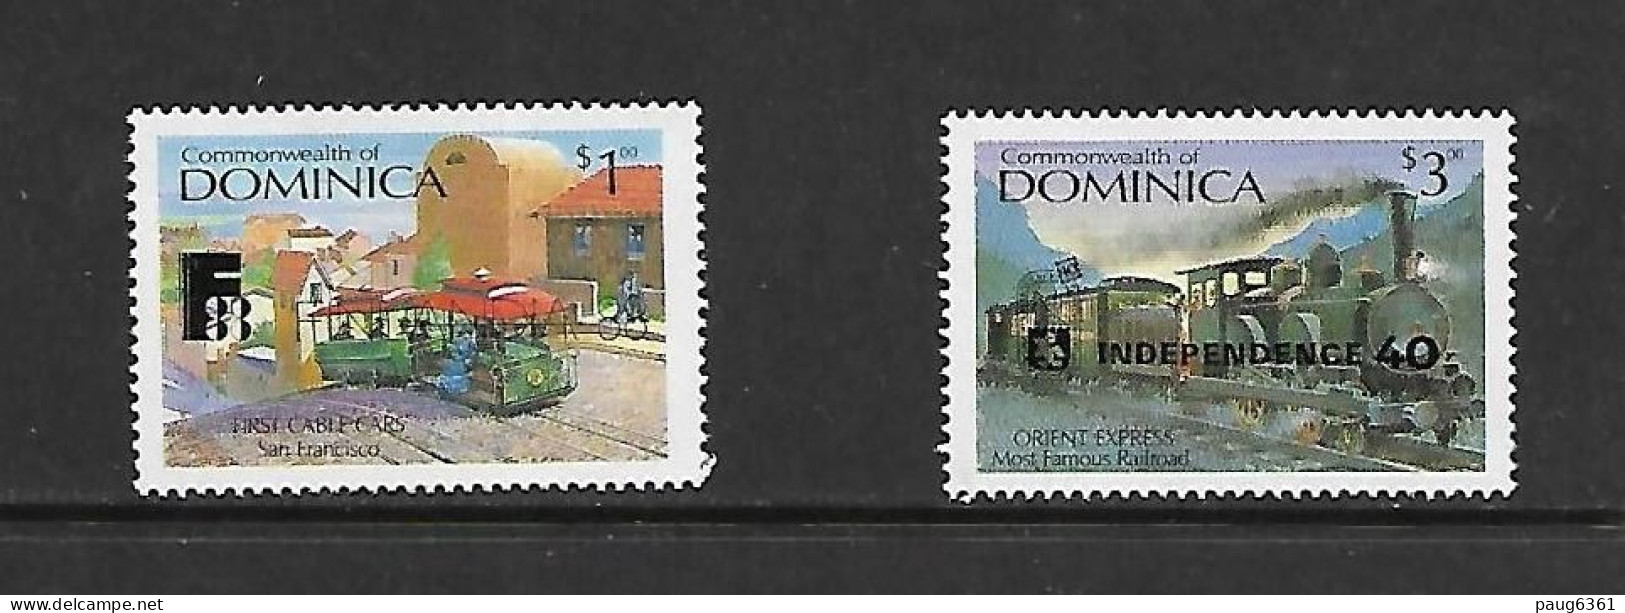 DOMINICA 1988 TRAINS SURCHARGE EXPOS PHILATELIQUES YVERT N°1009/1010 NEUF MNH** - Trains